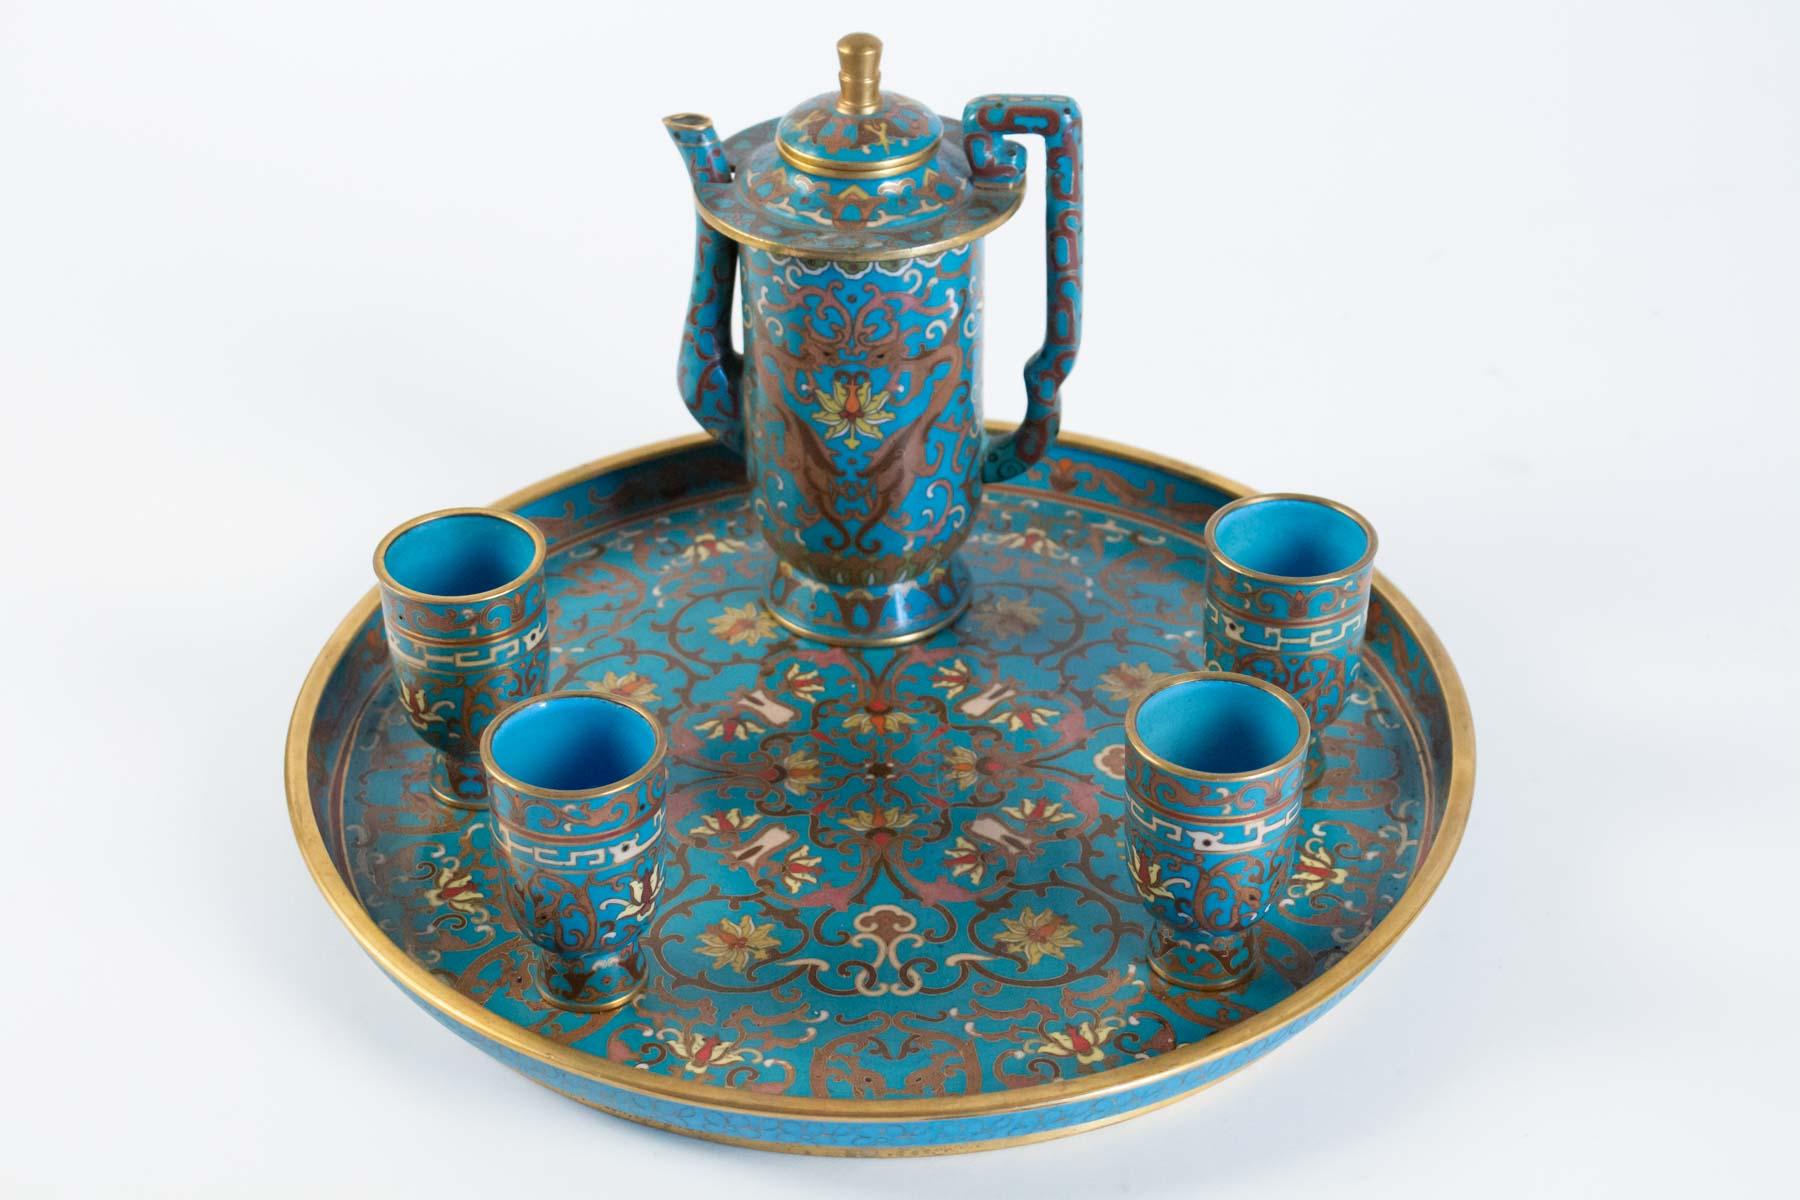 Plateau, China, antiquity, decorated enamel cloisonné with its ewer and four glasses for rice alcohol or precious tea, 1930, object art.
Measures: H 15cm, D 28cm.
 